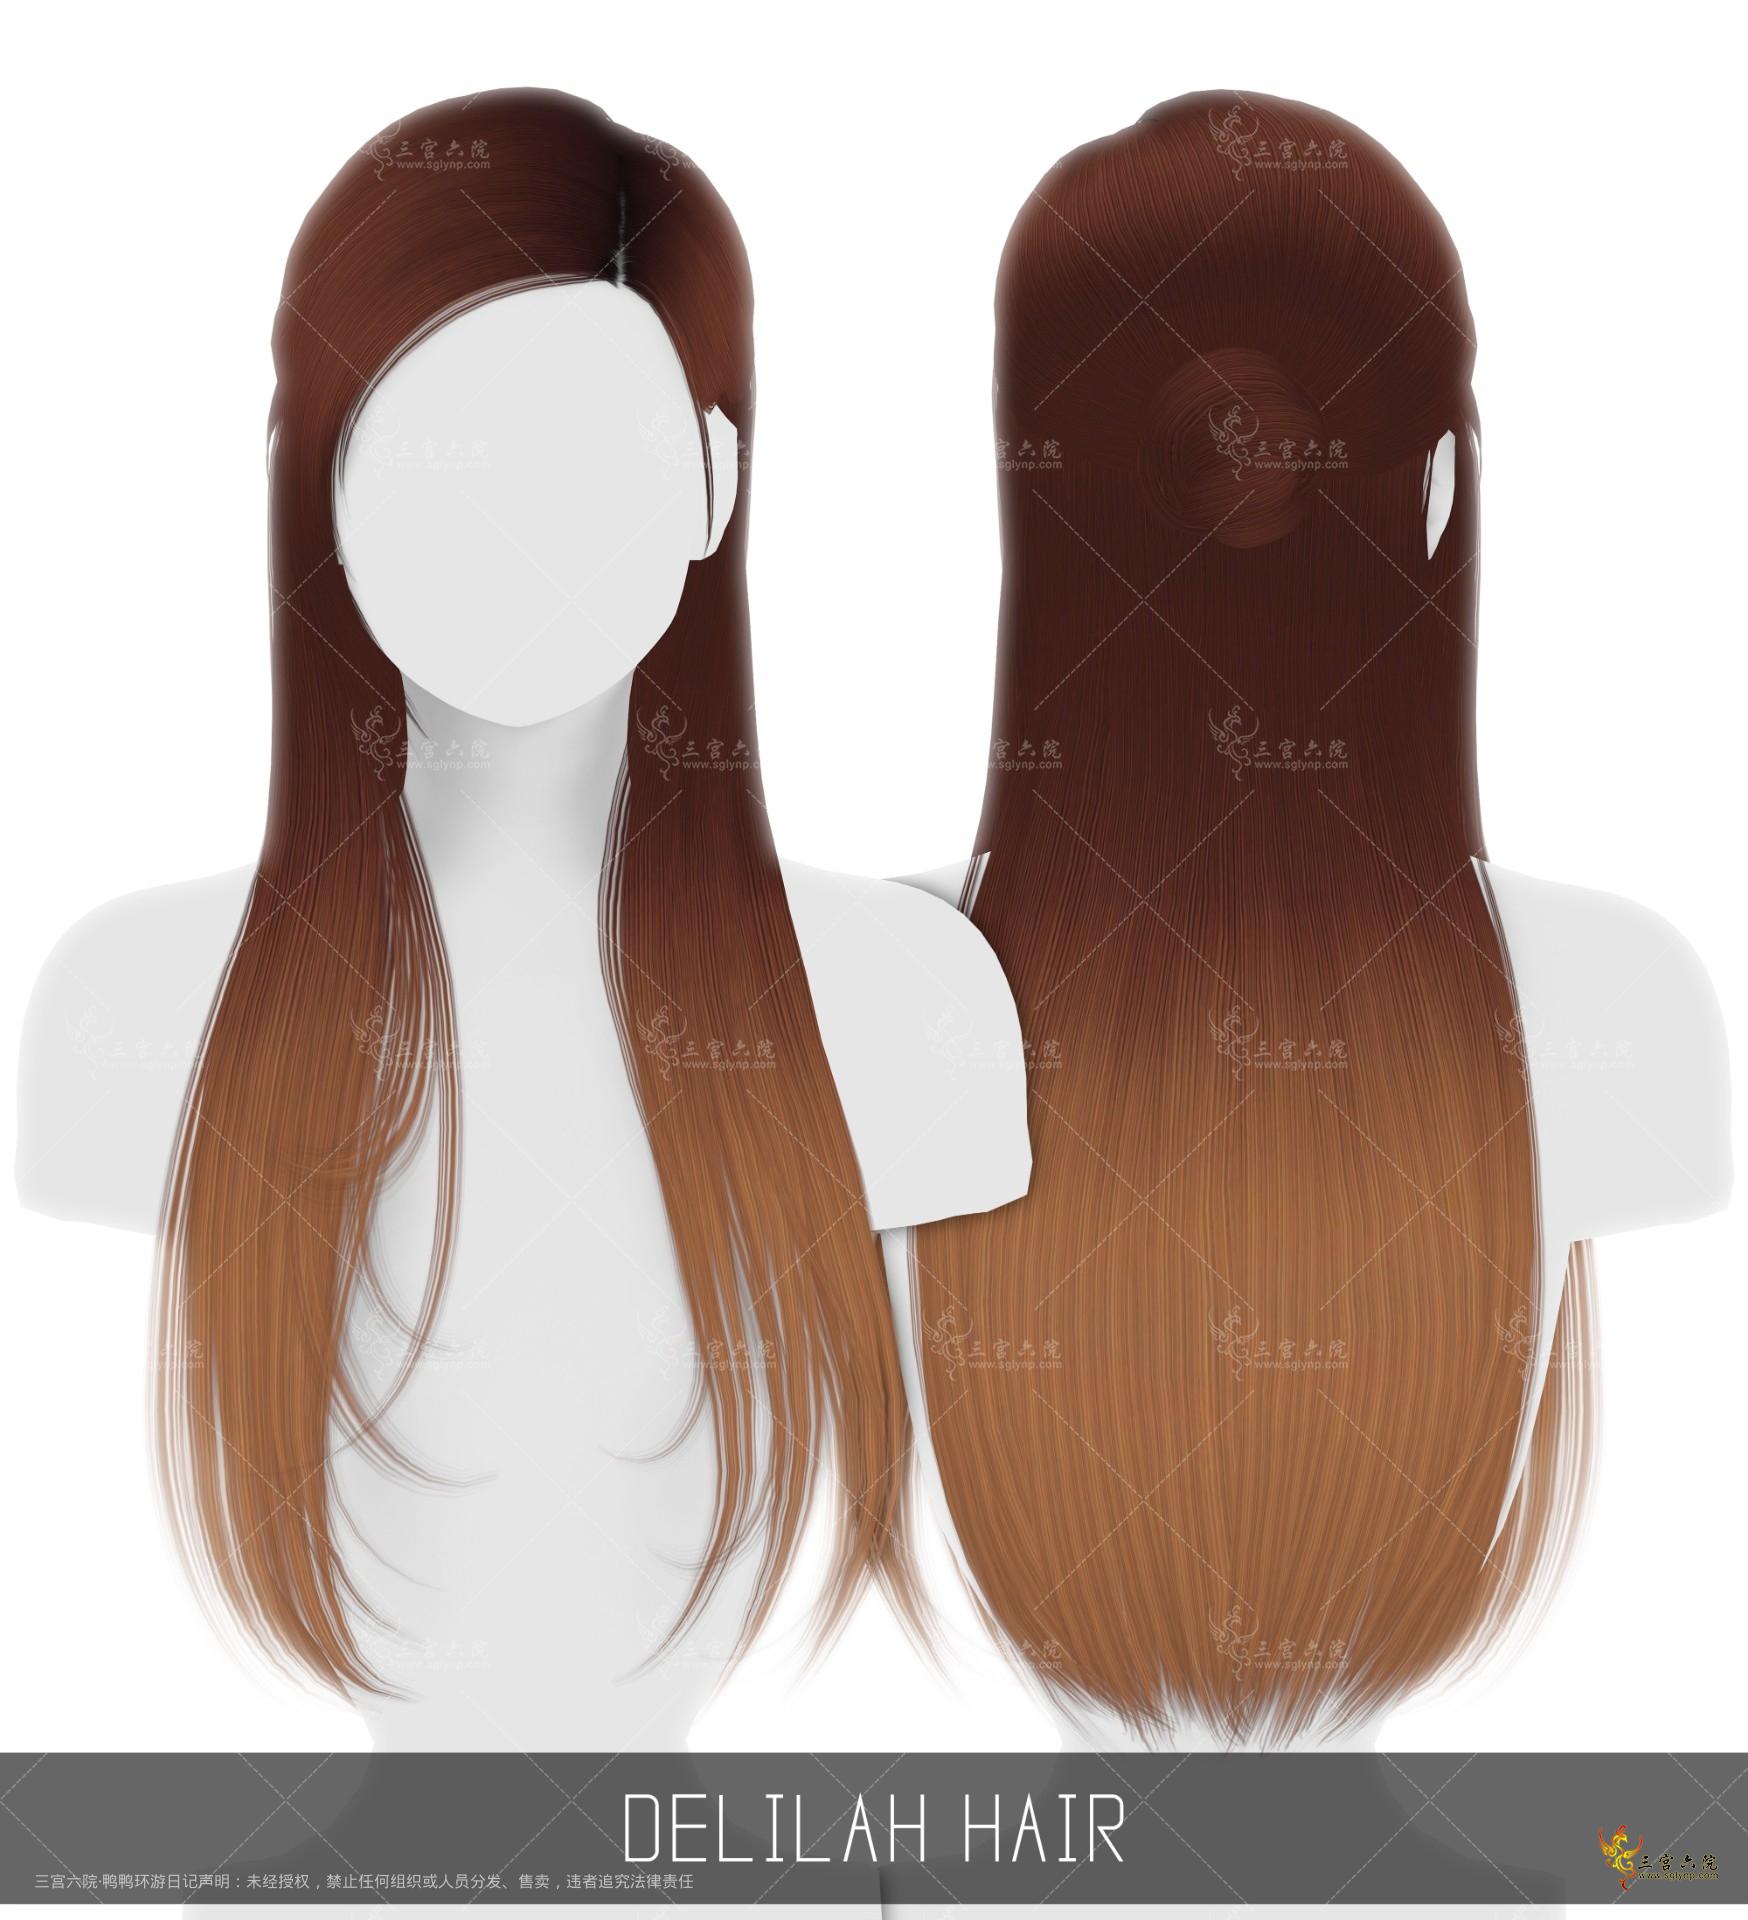 DelilahHair.png